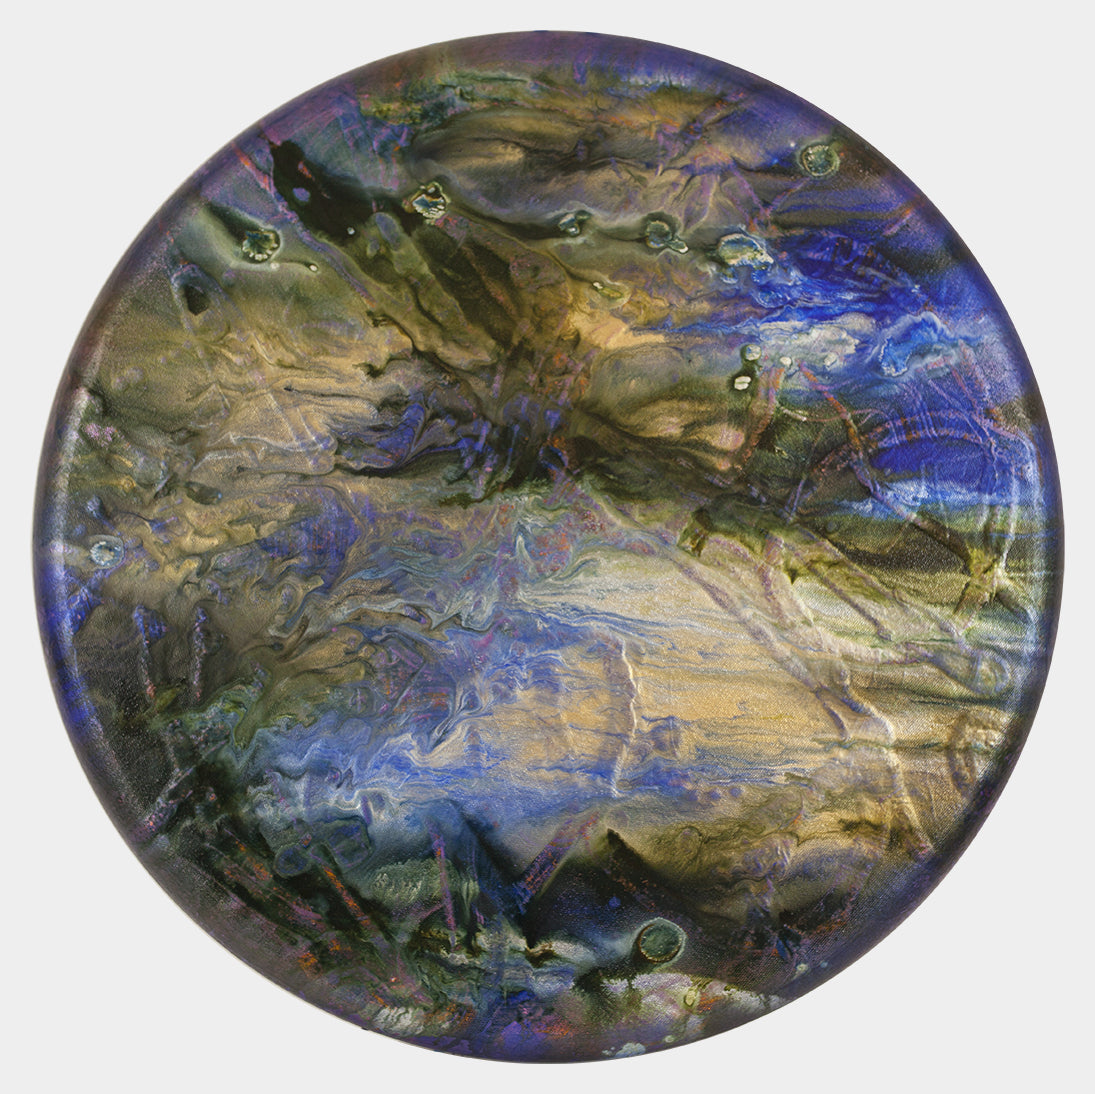 ©2023 Alicia R. Peterson, *Unknown III*. Acrylic on 20-inch convex canvas. Photographer: Peter Scheer.